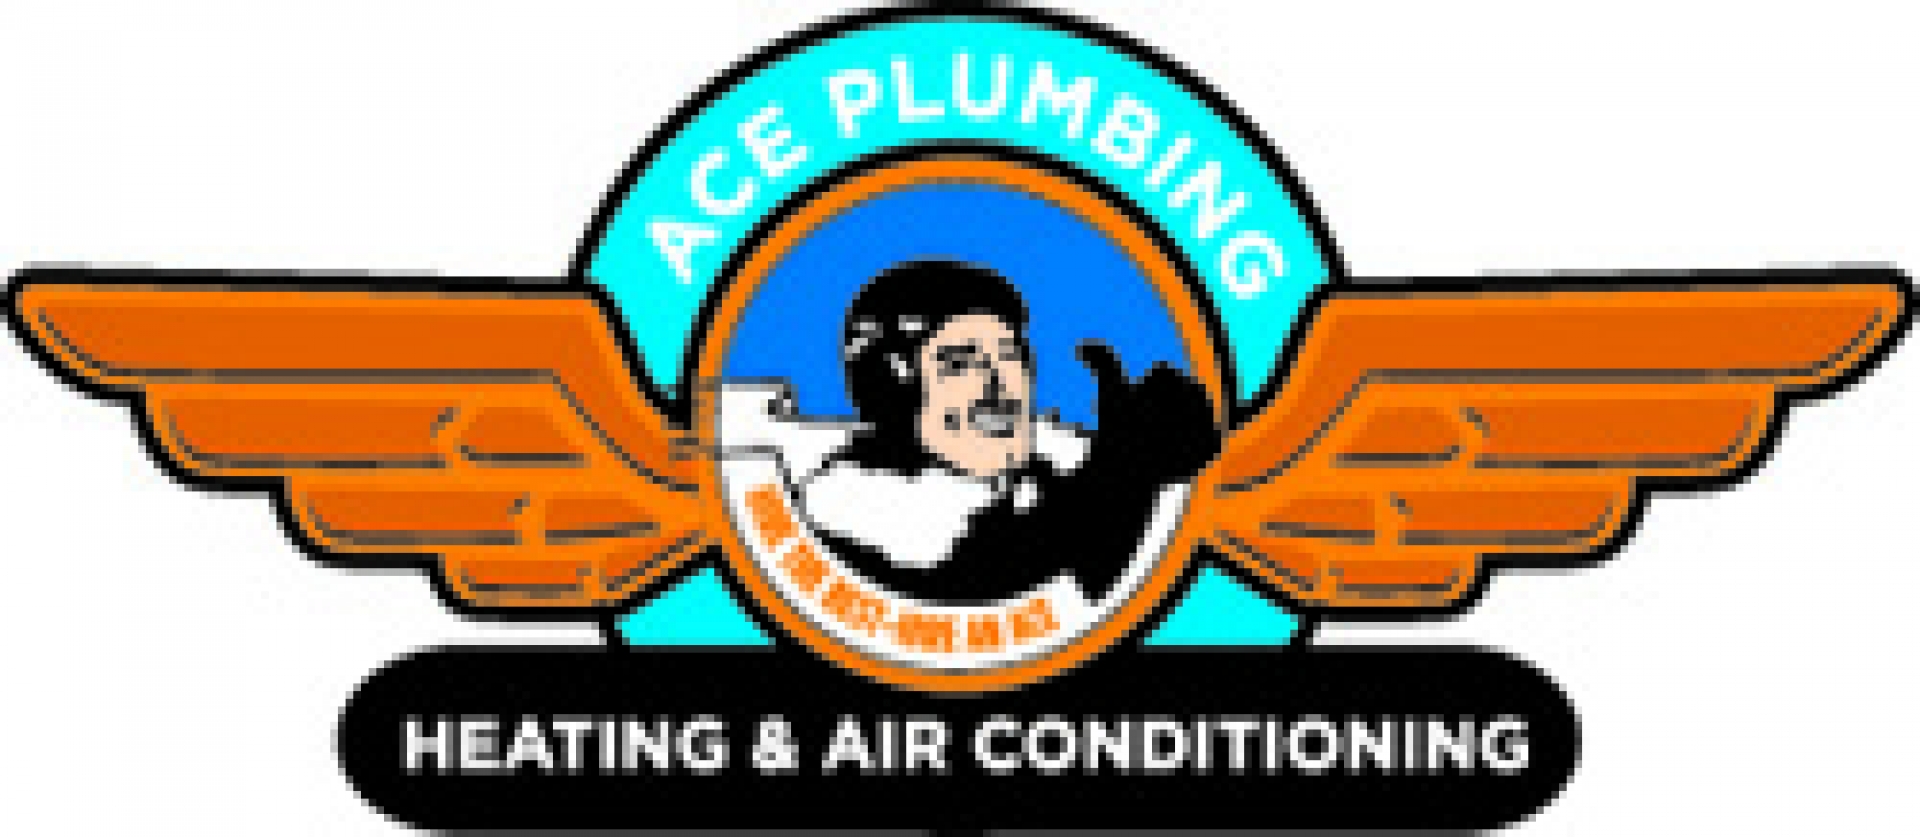 Ace Plumbing Heating and AIr company logo